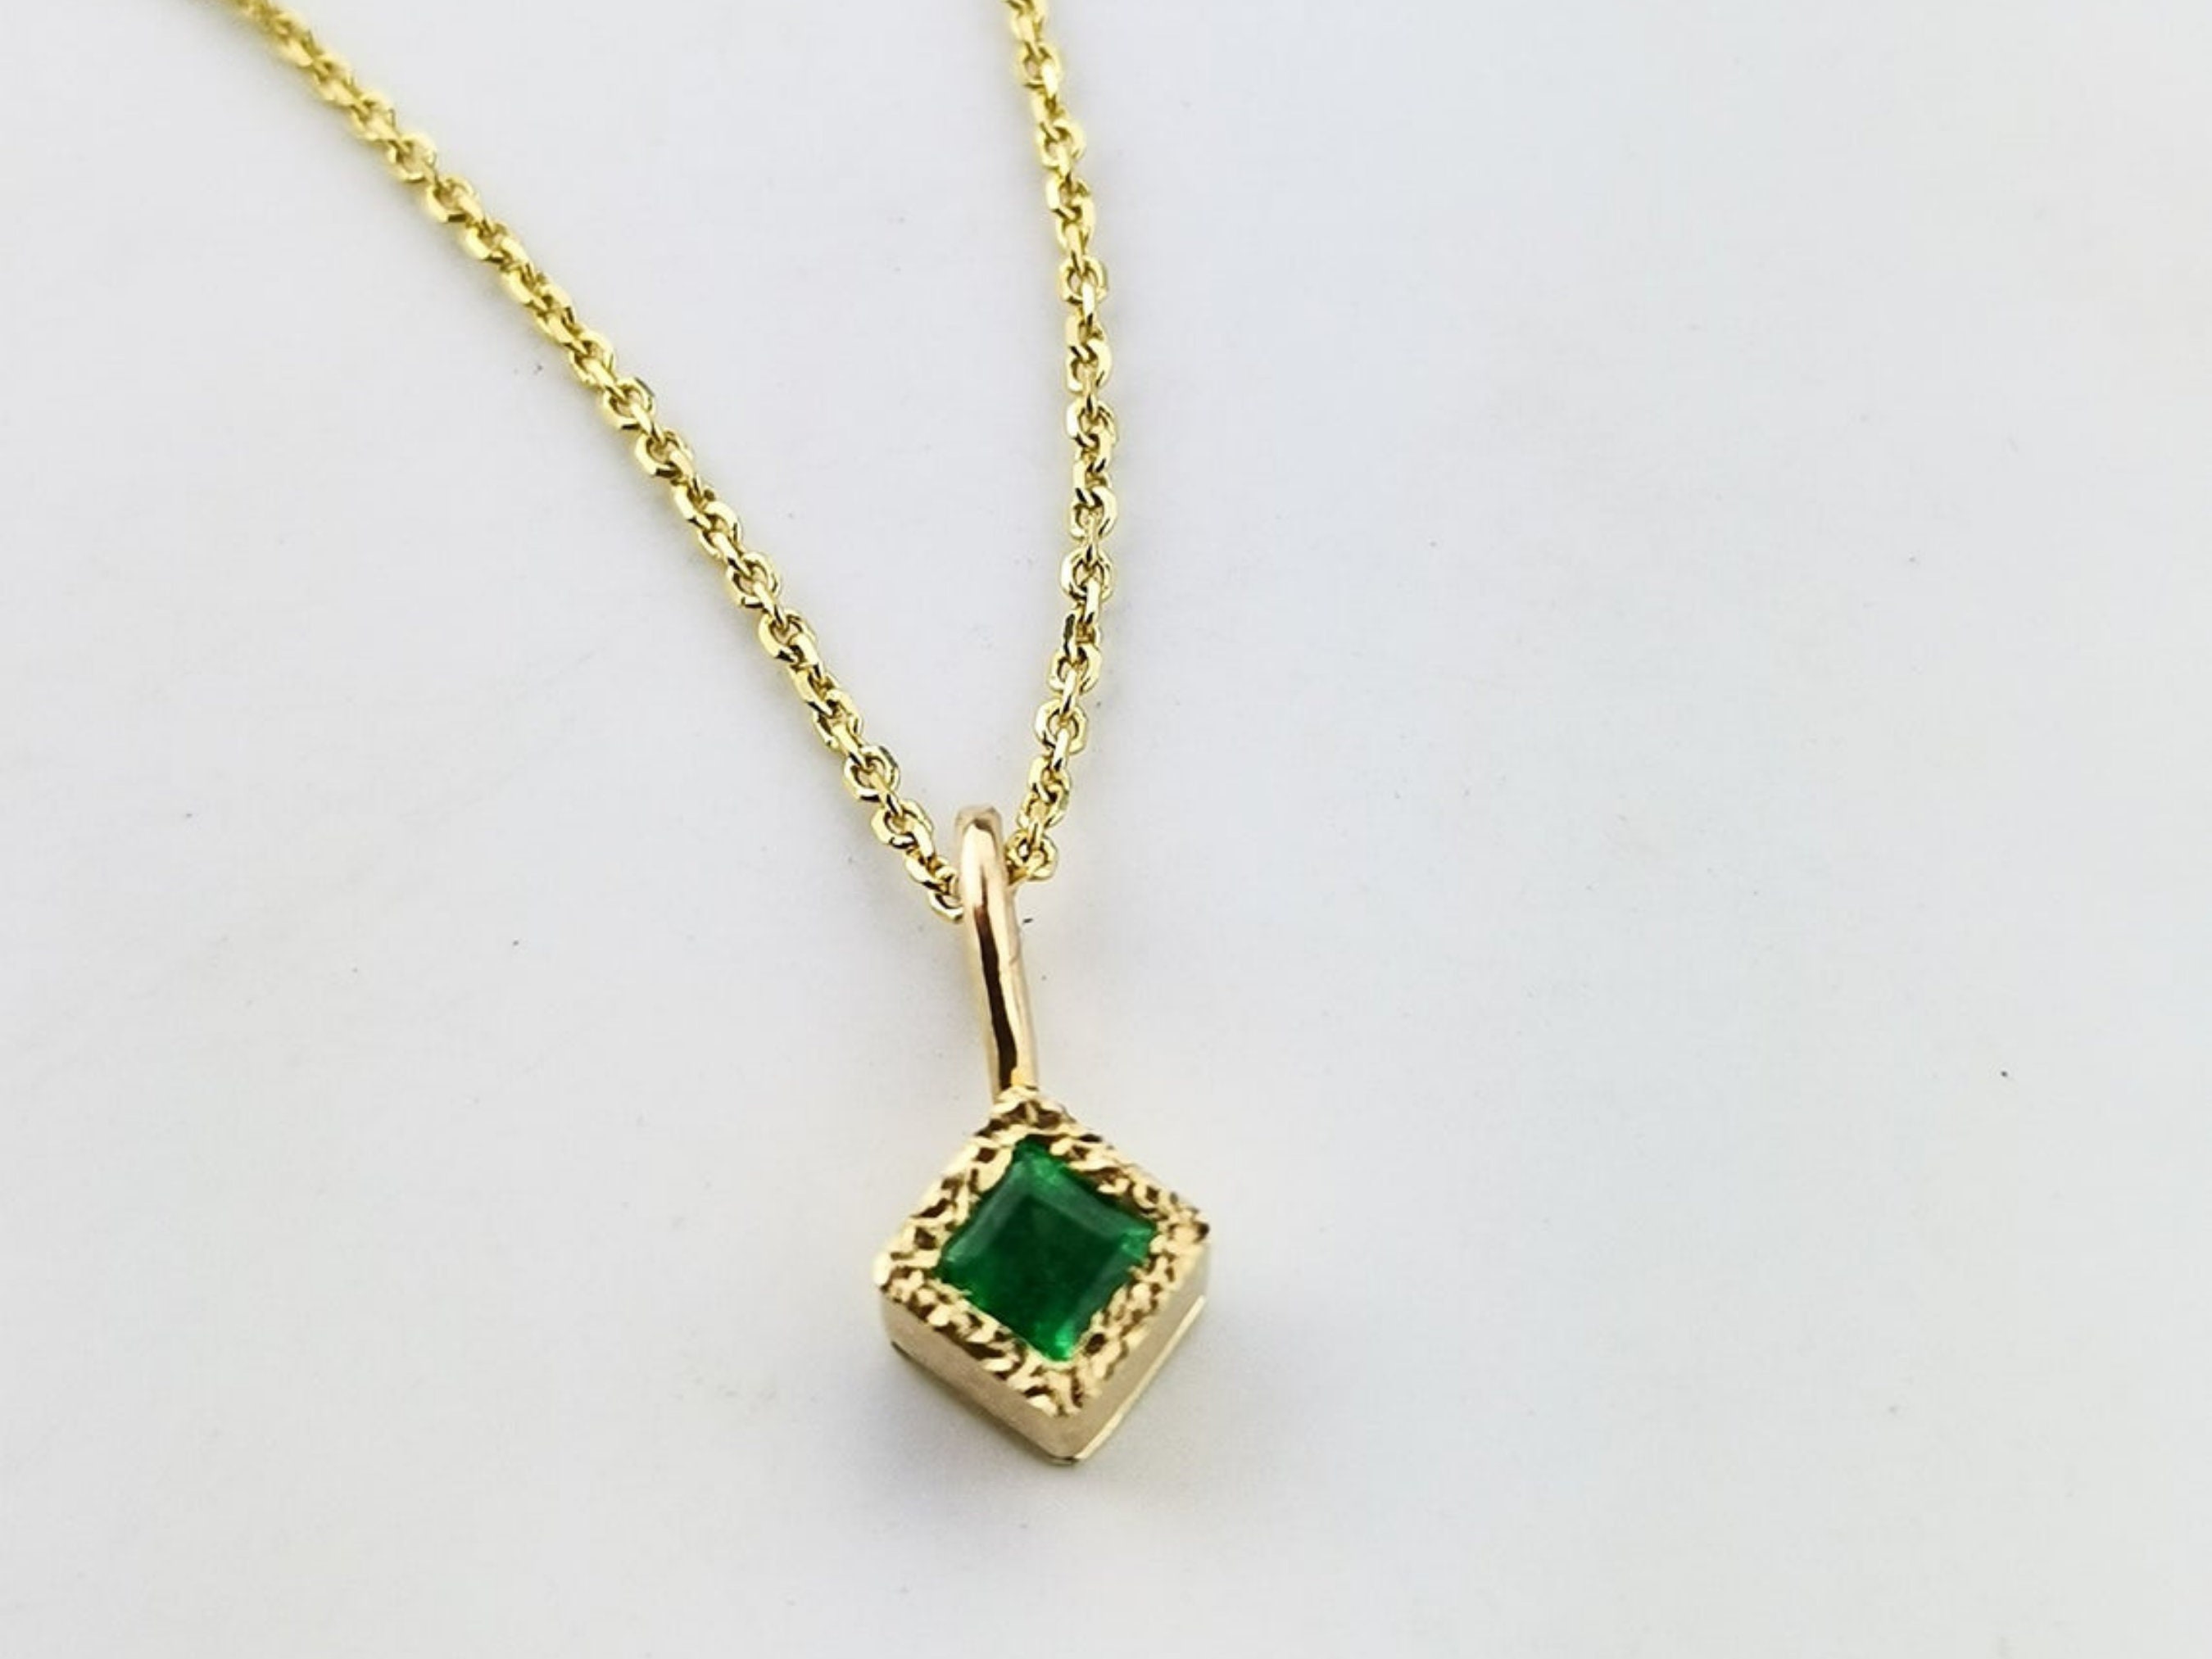 Square Emerald Pendant Necklace in 14k Gold 14k Yellow Gold | Etsy